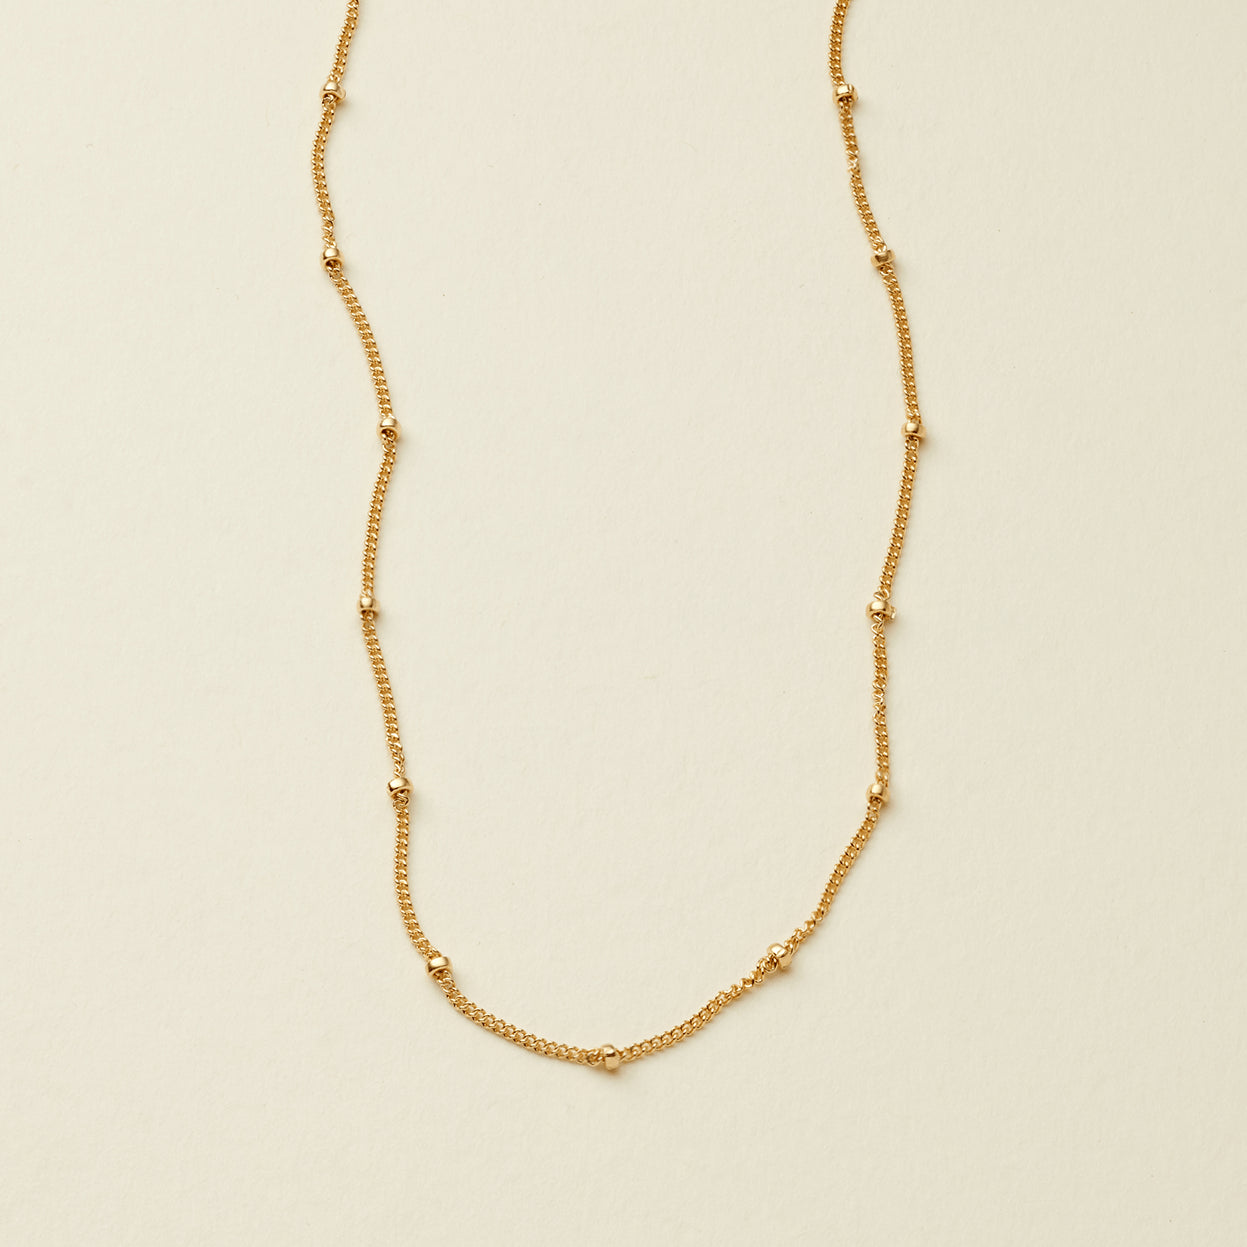 Satellite Choker Necklace Gold Filled / 13-14" Necklace